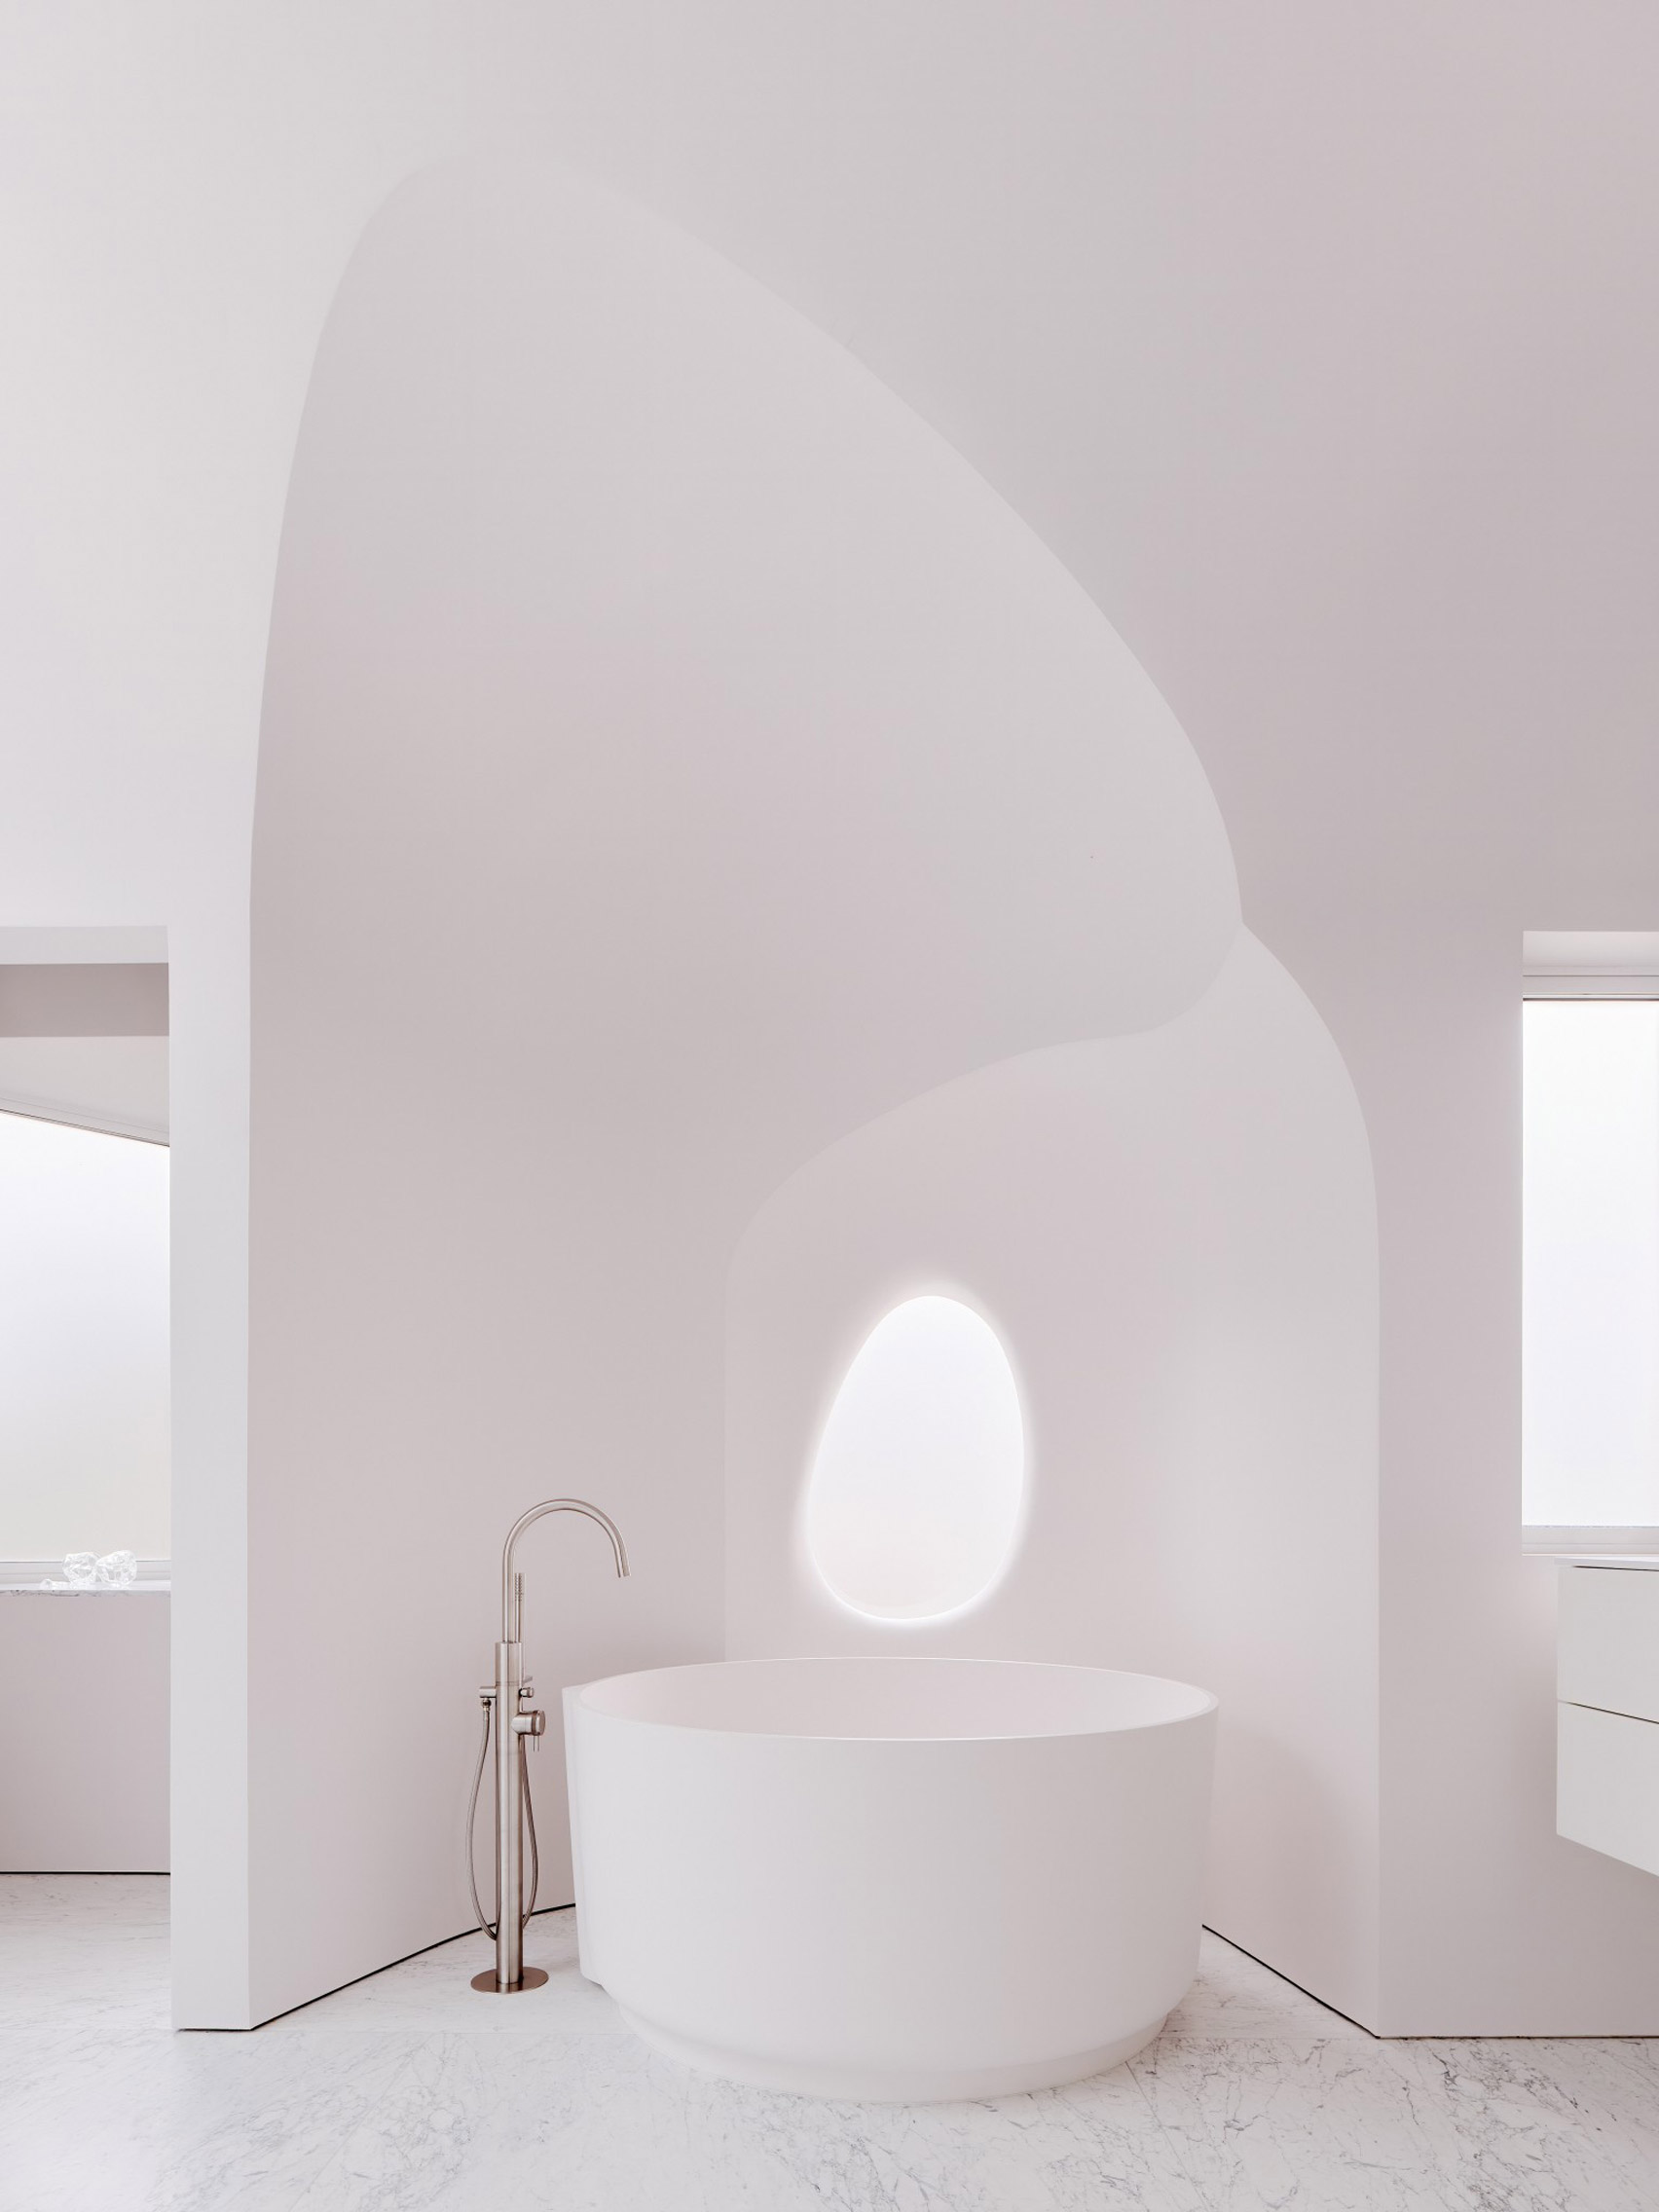 Freestanding white tub in bathroom nook designed by OPA